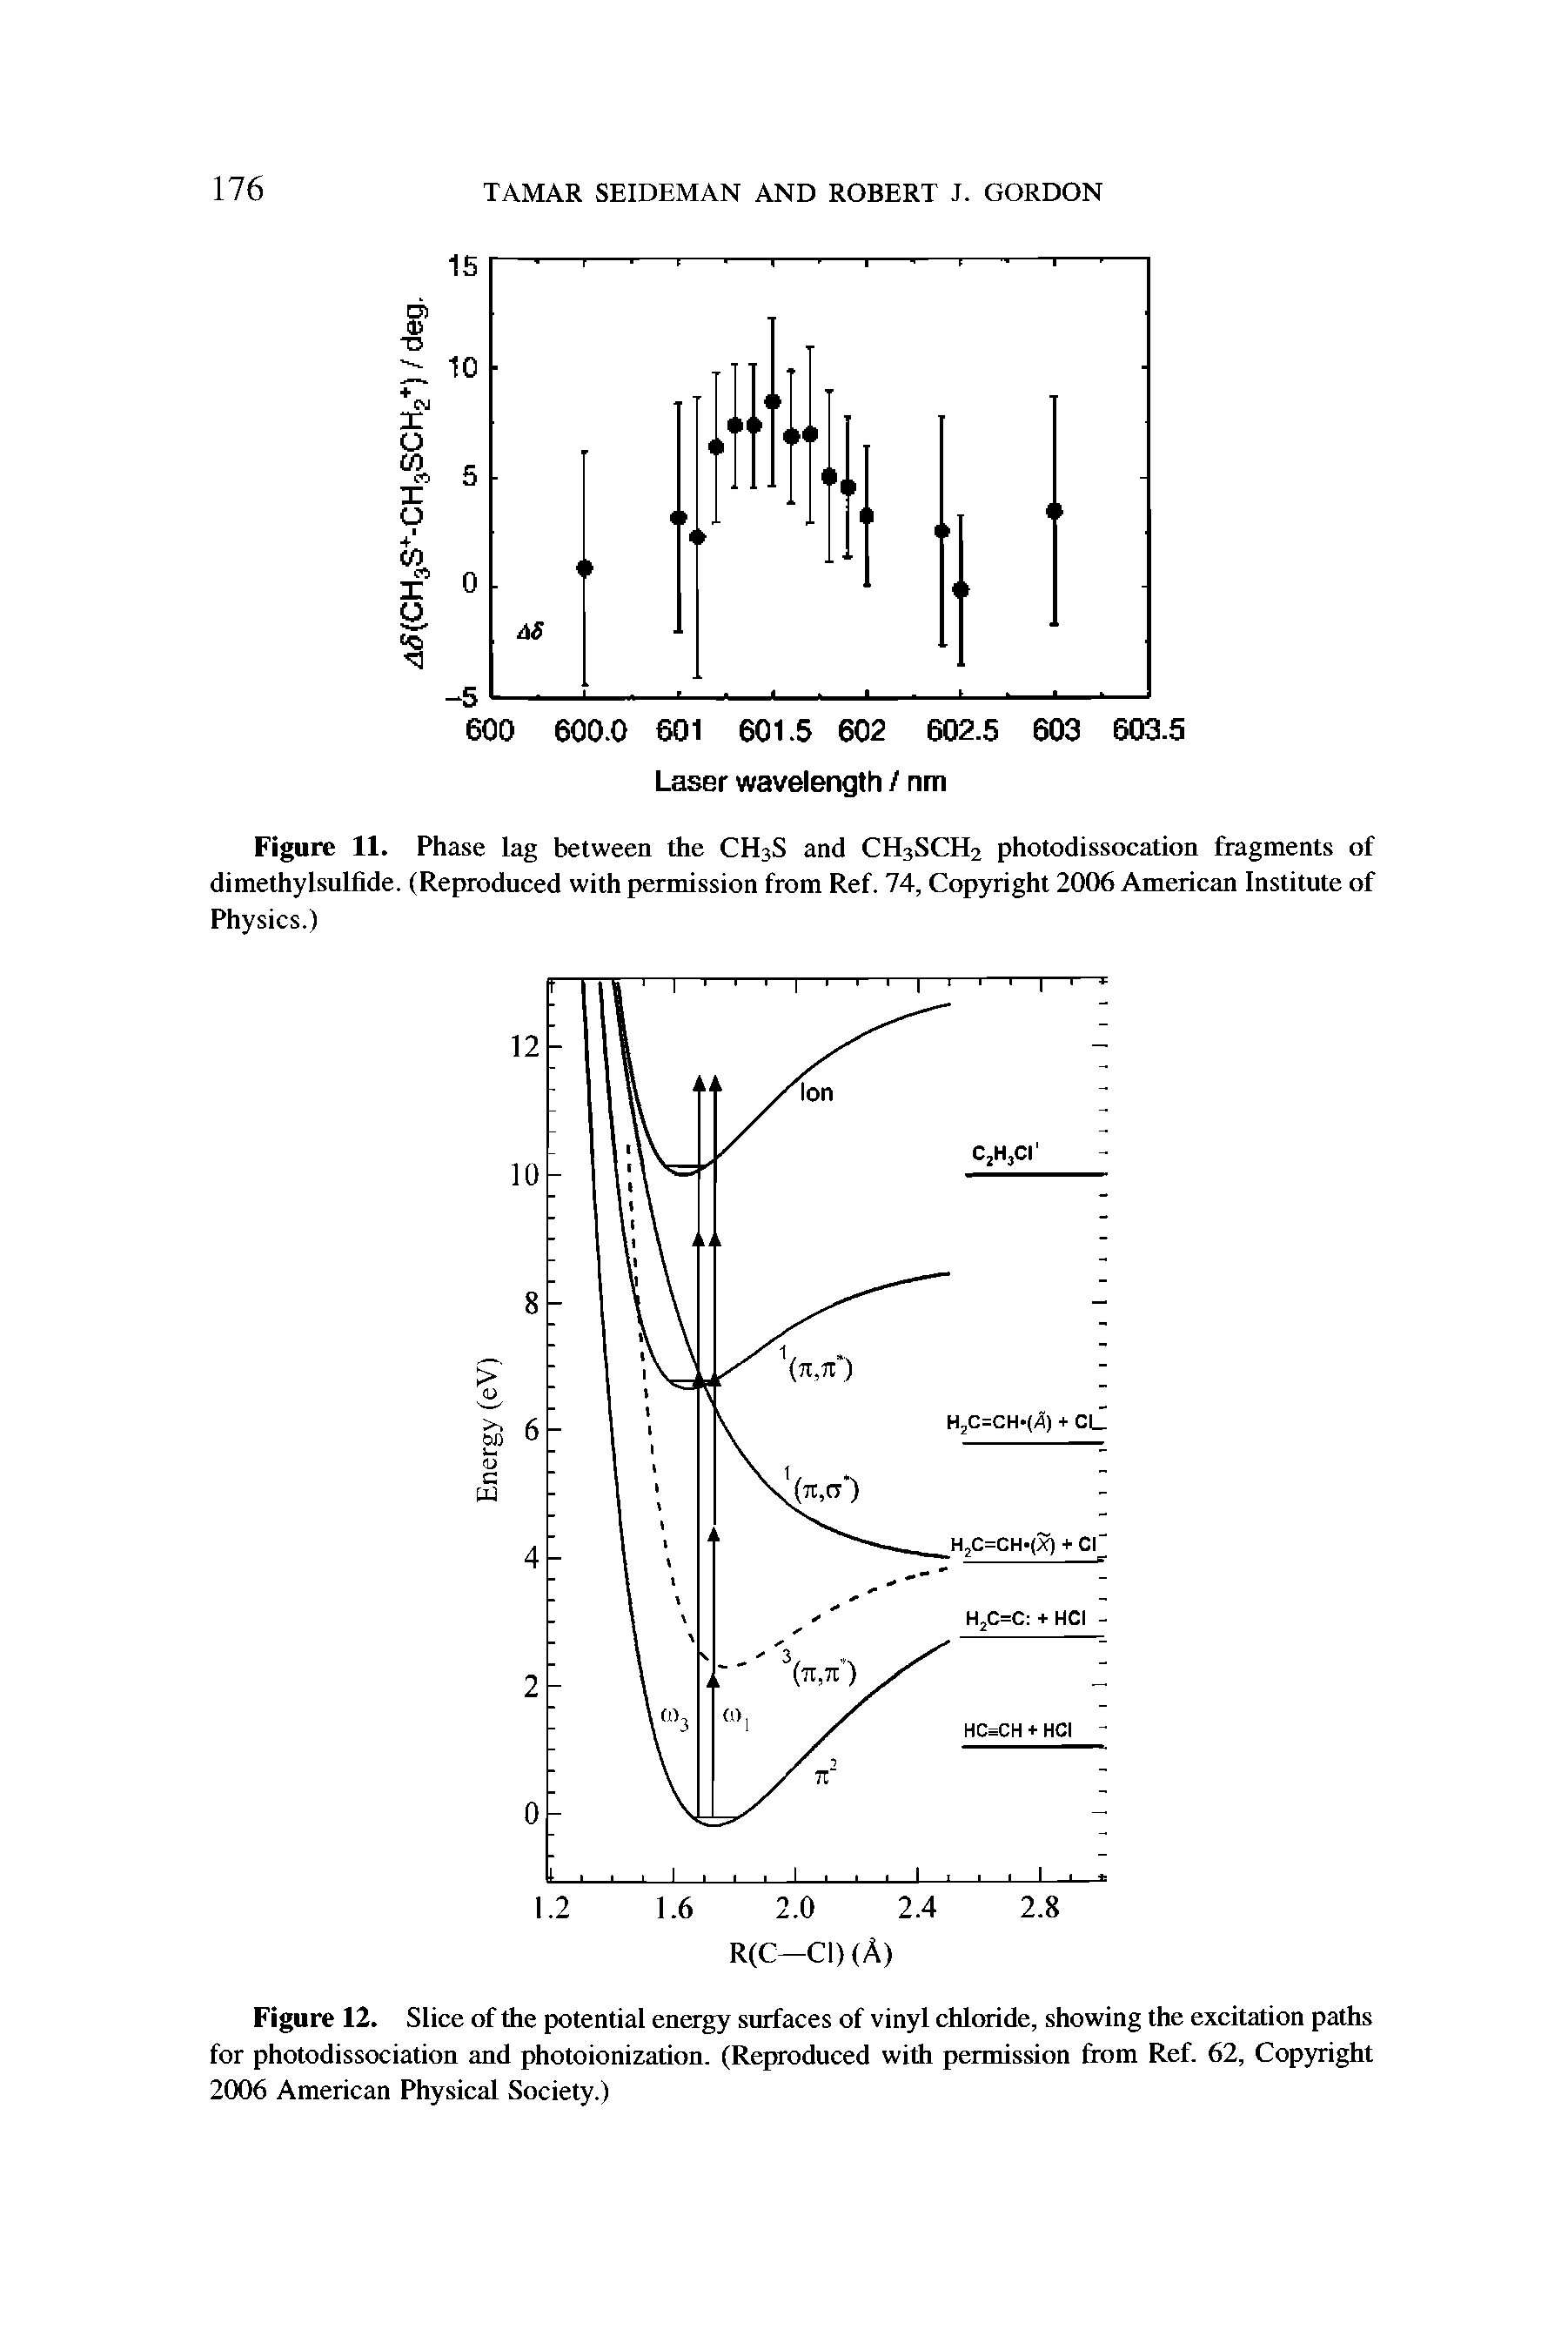 Figure 12. Slice of the potential energy surfaces of vinyl chloride, showing the excitation paths for photodissociation and photoionization. (Reproduced with permission from Ref. 62, Copyright 2006 American Physical Society.)...